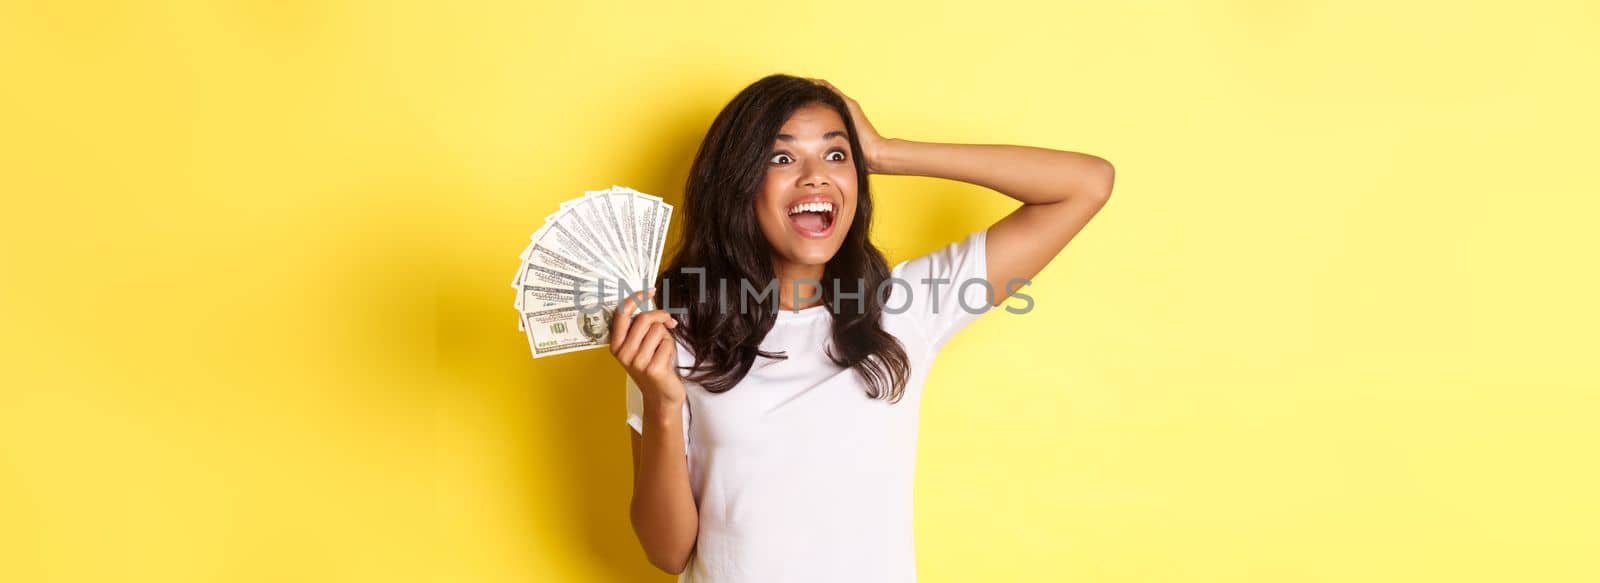 Image of lucky african-american girl, looking excited at upper left corner, holding money, going shopping, standing over yellow background.